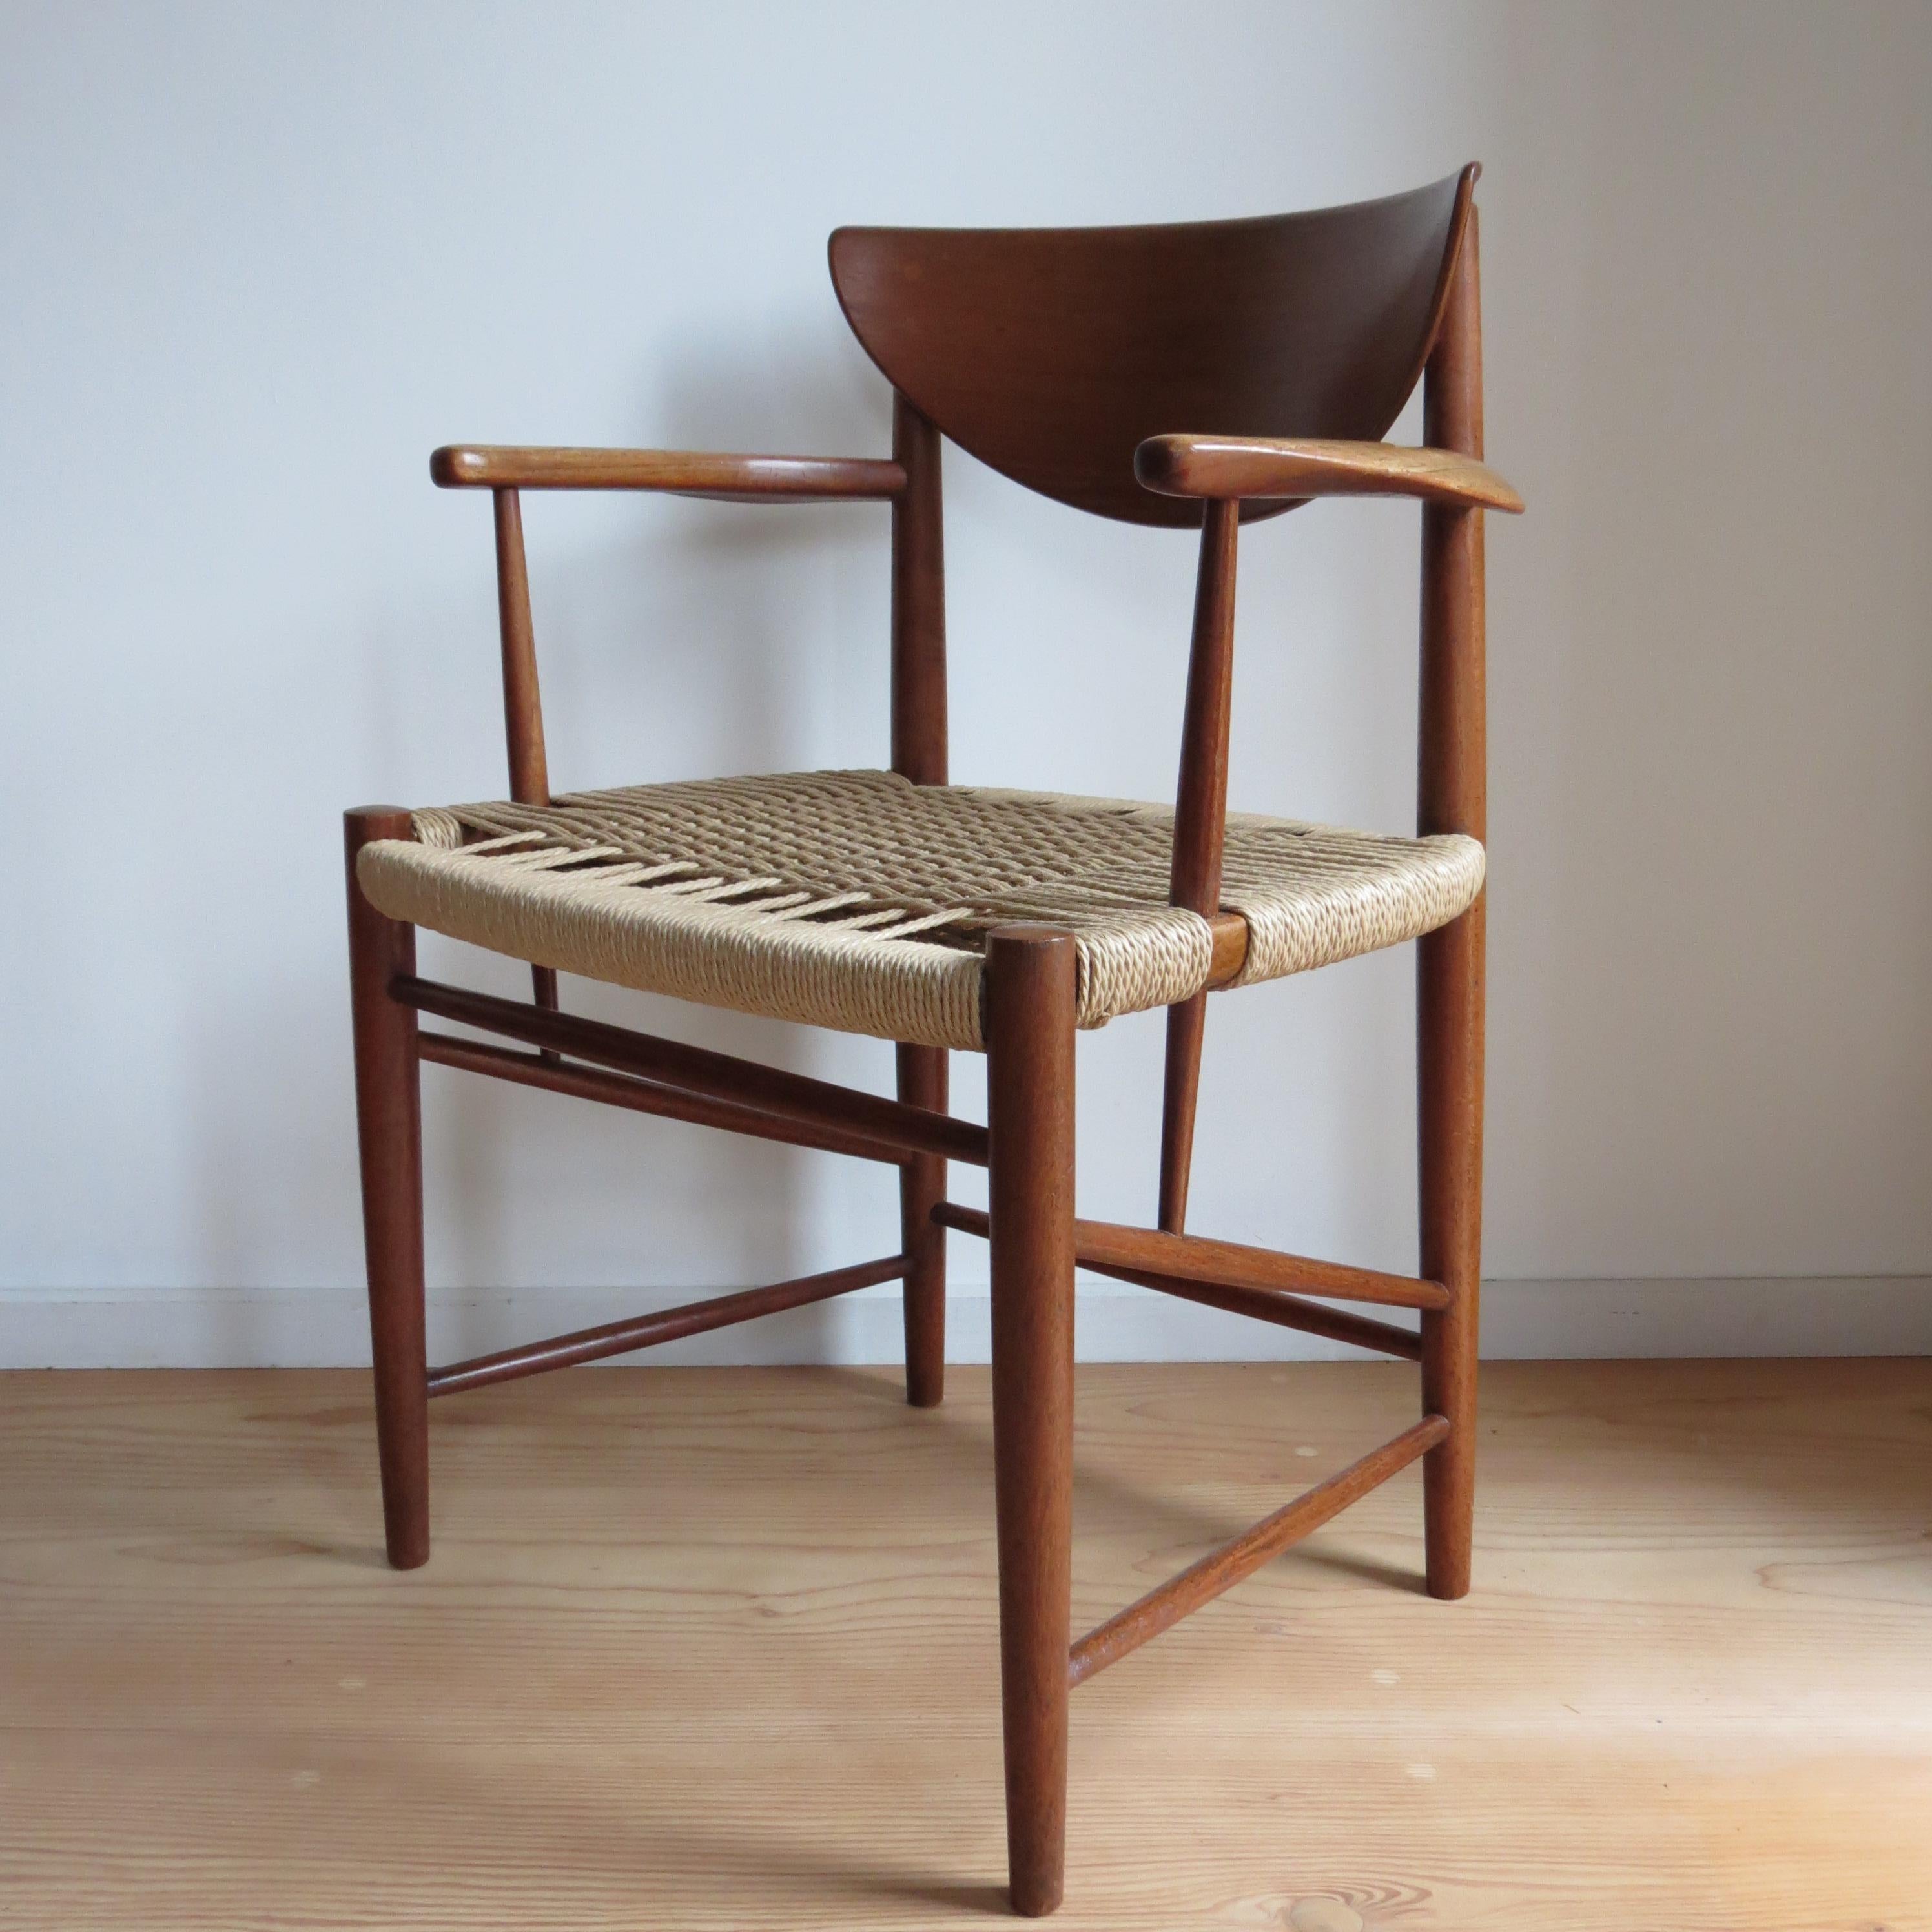 Original Danish chair designed by Peter Hvidt and Orla Molgaard-Nielsen for Soborg Mobelfabrik, Denmark. Model Number 317. Originally designed in 1956, this is an early edition. Made from solid Teak frame, newly recorded seat using a Japanese style